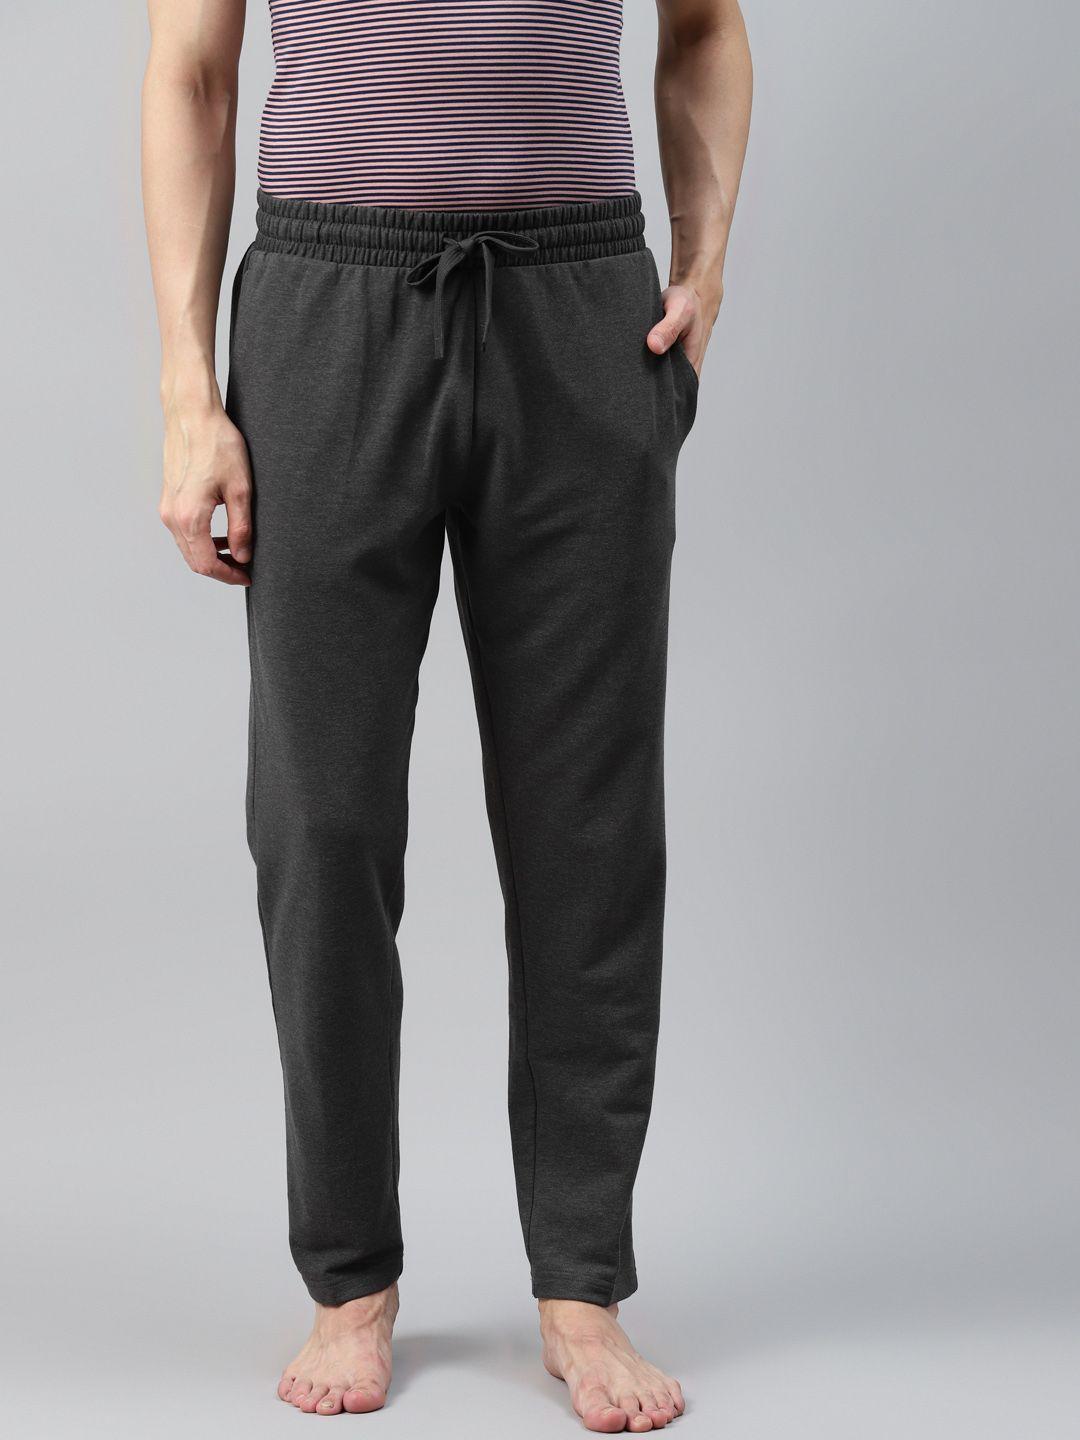 marks & spencer men charcoal grey solid knitted lounge pants